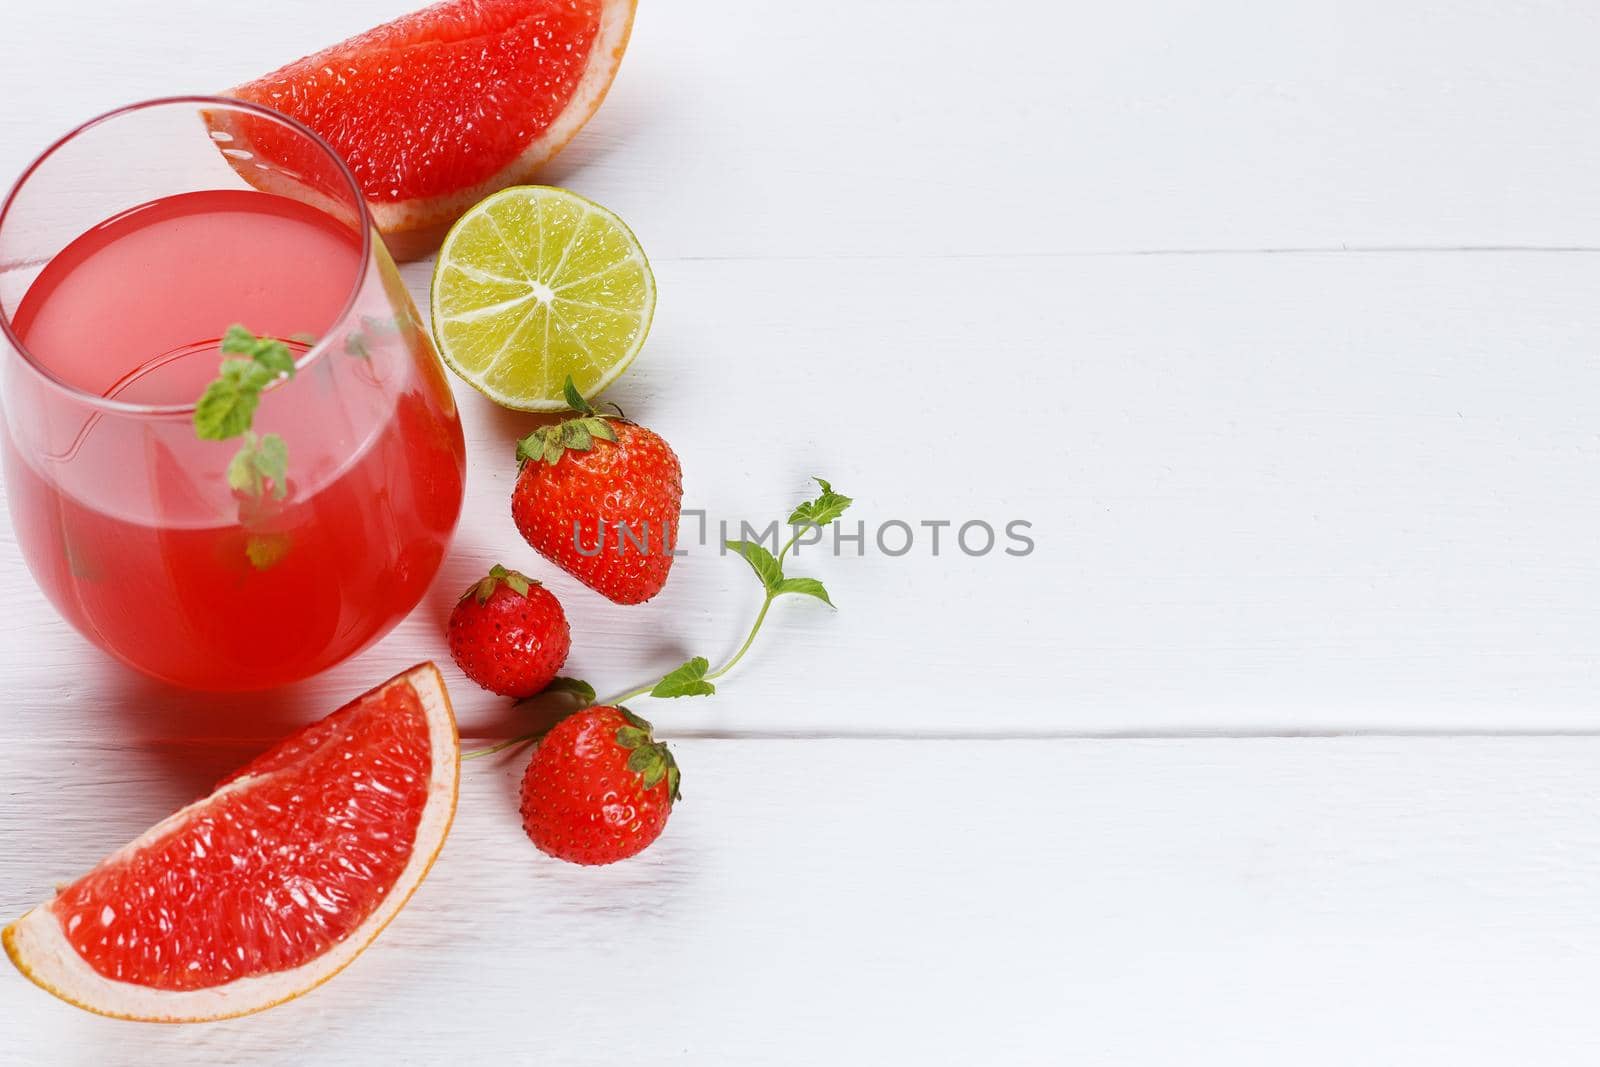 Fresh grapefruit juice in a glass with grapefruit slices, lime and mint on a wooden background. Copy space, selective focus